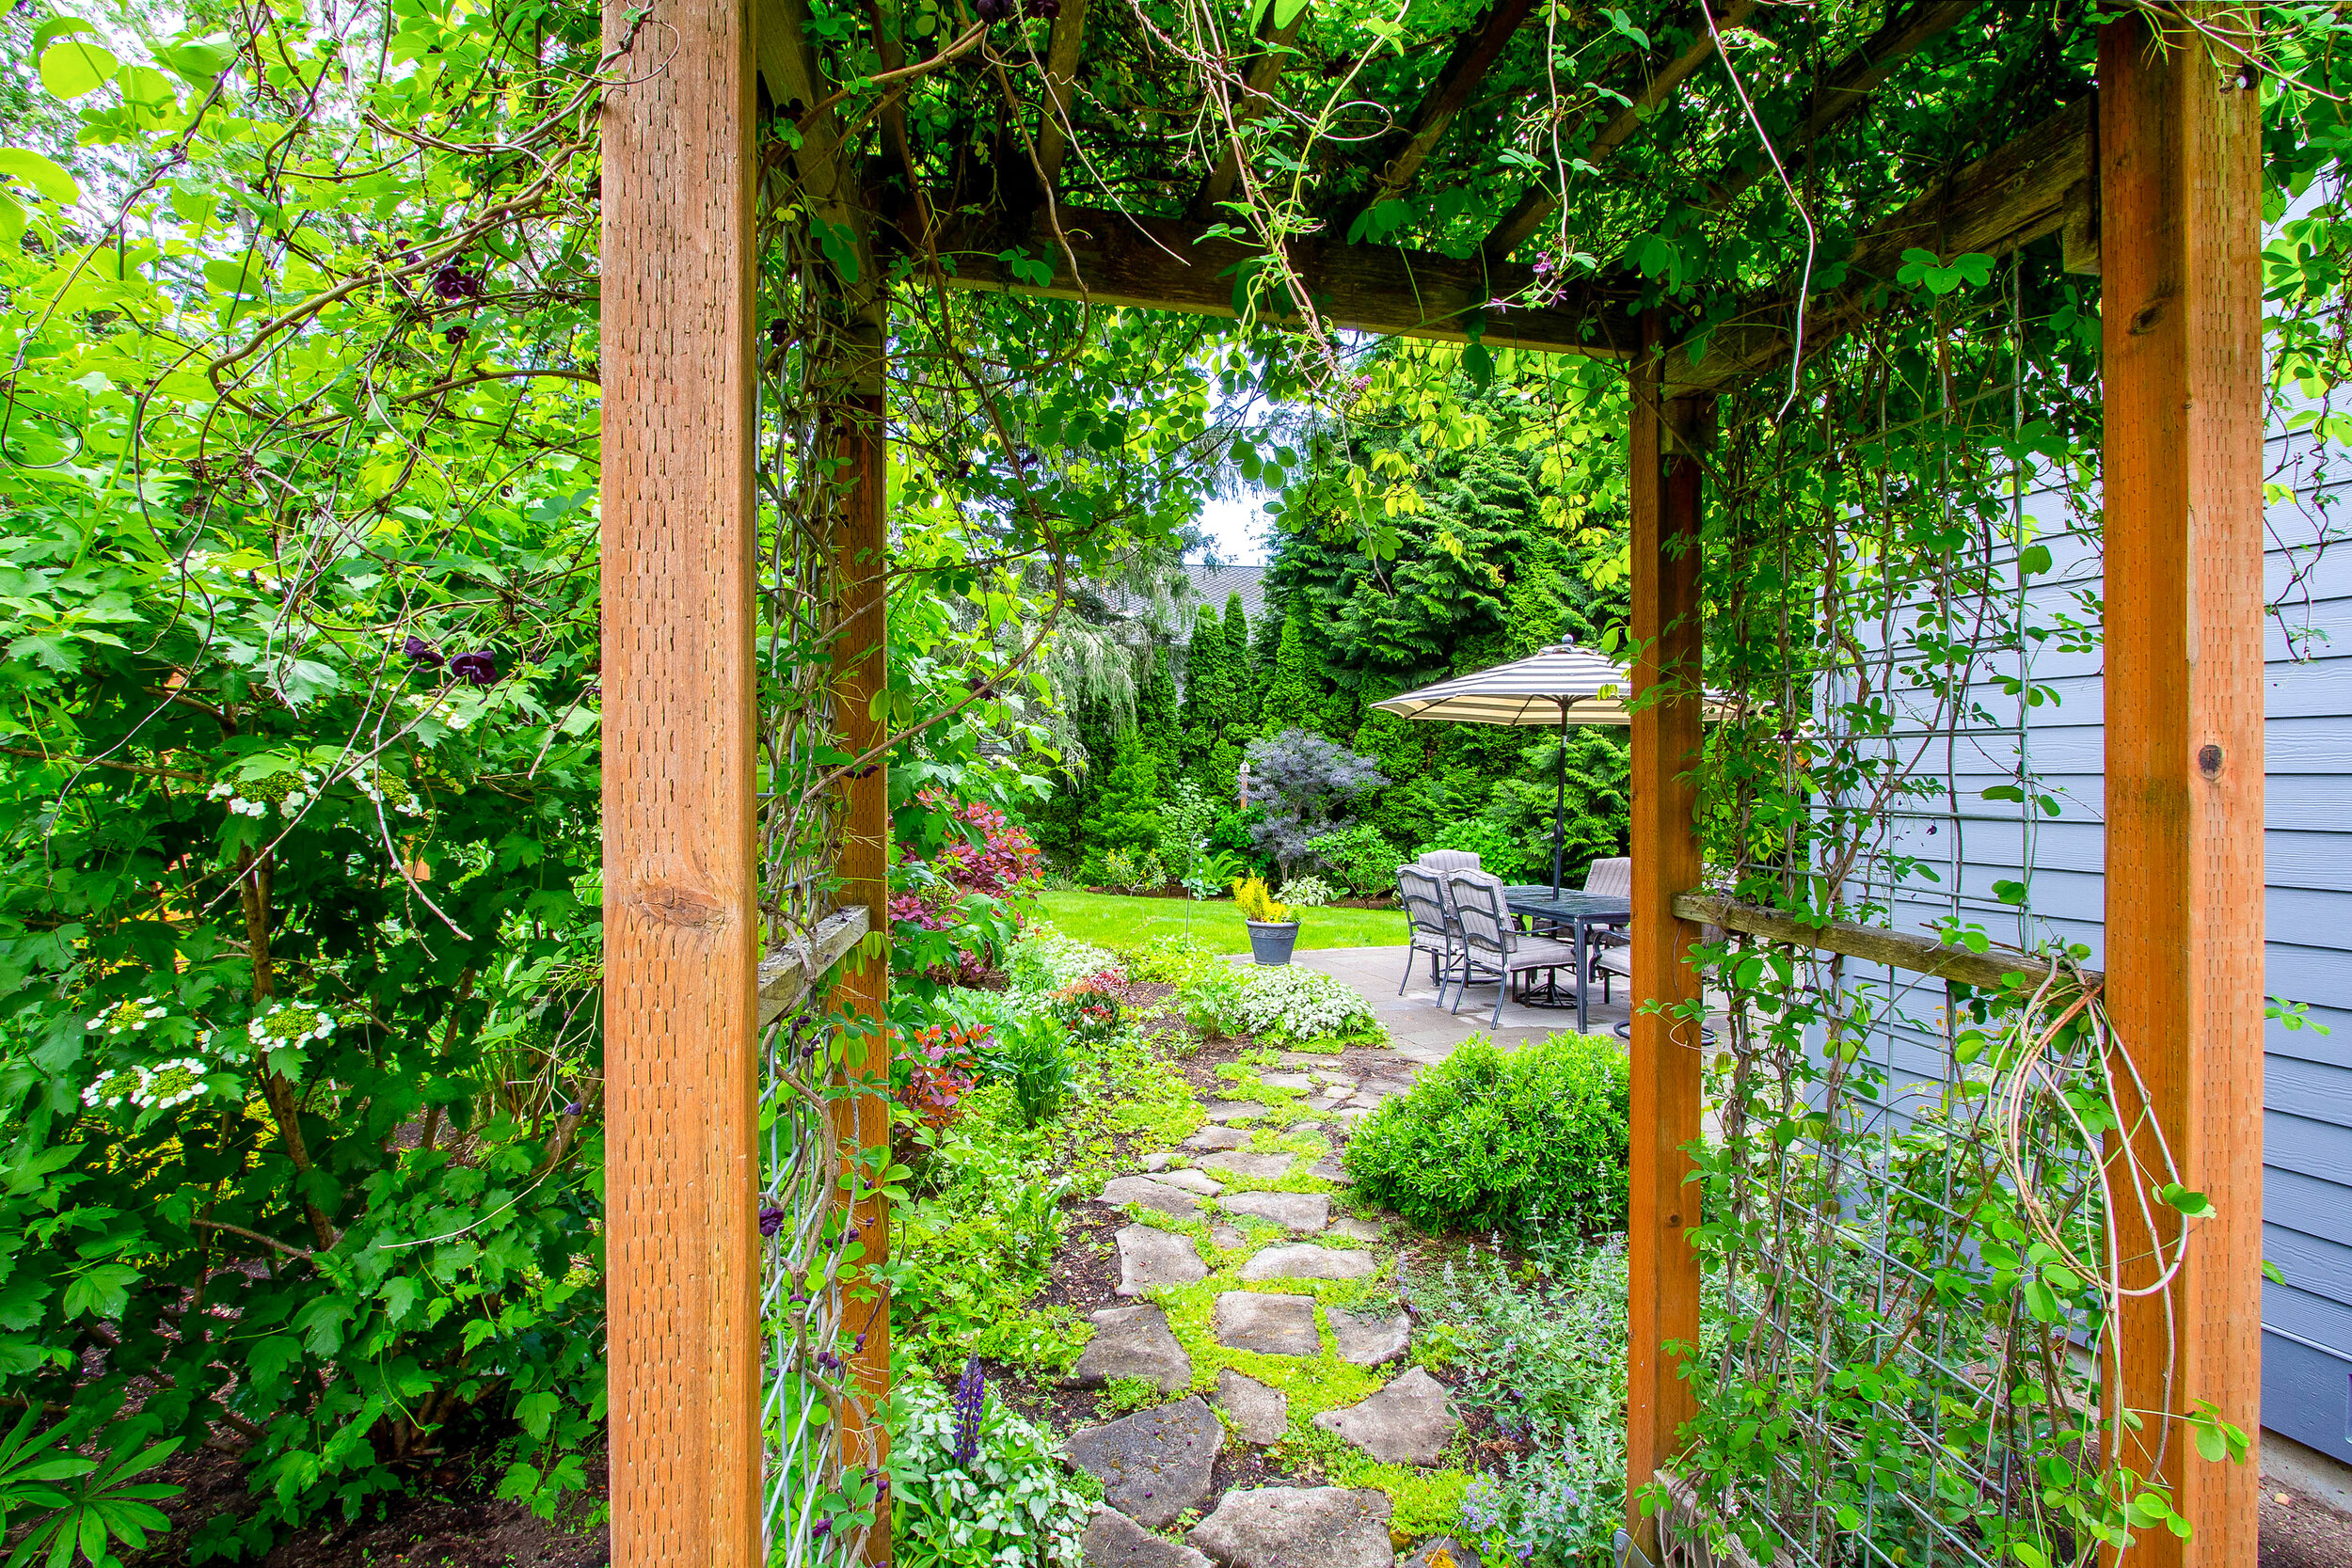  Indulge in the intricate landscaping as the garden comes into full bloom from spring through summer.&nbsp; 